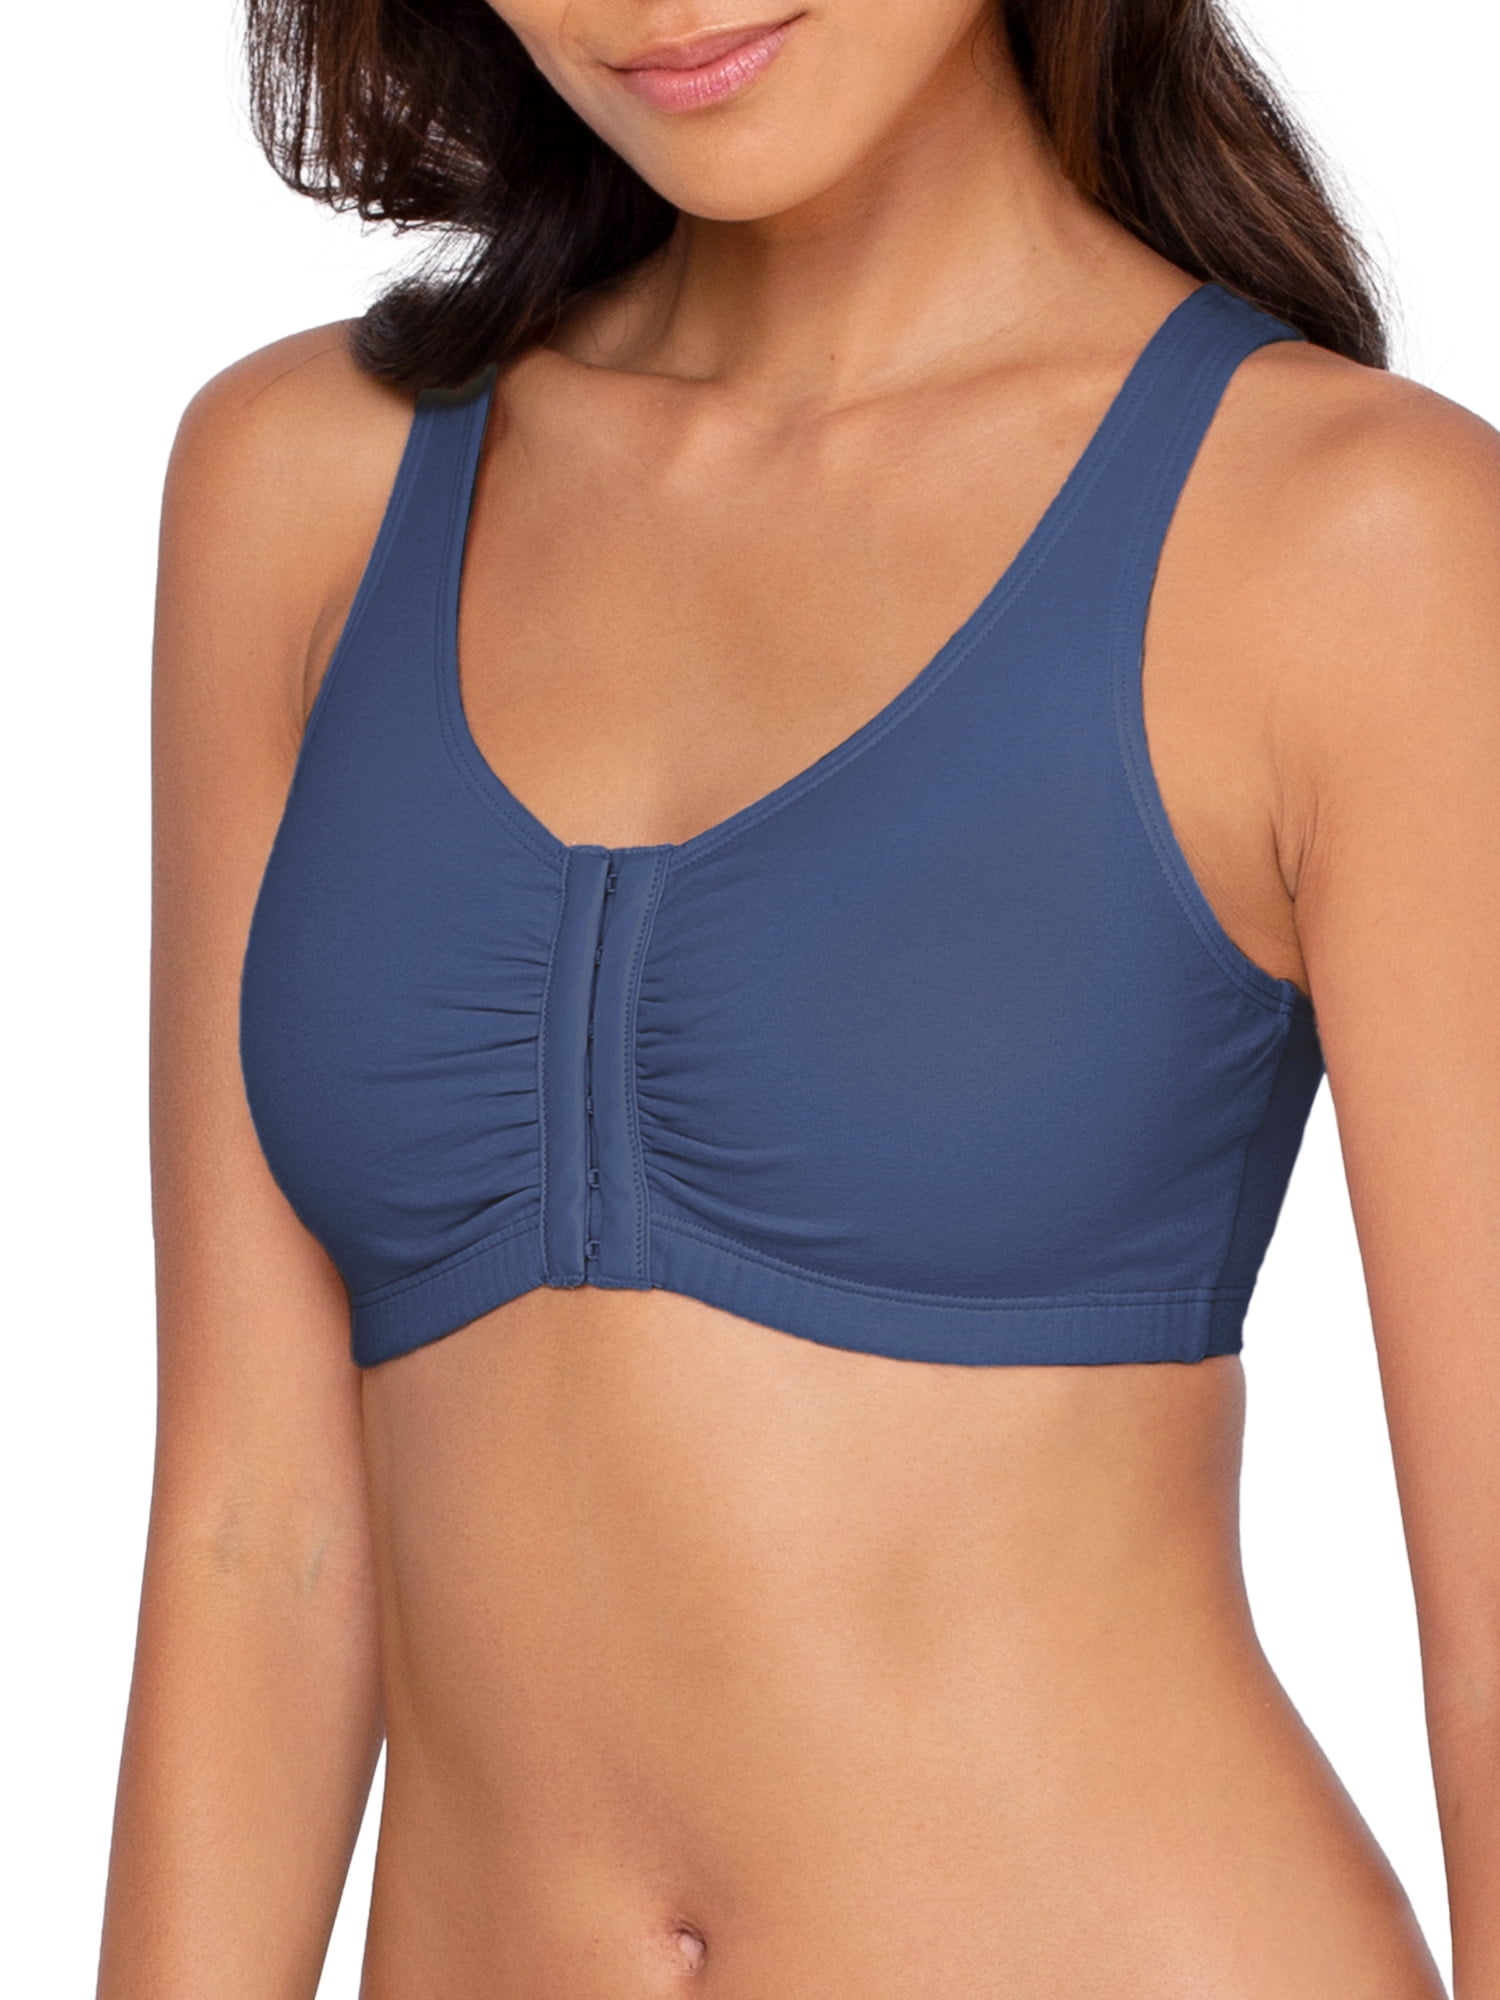 Fruit Of The Loom Women's Beyond Soft Front Closure Cotton Bra 3